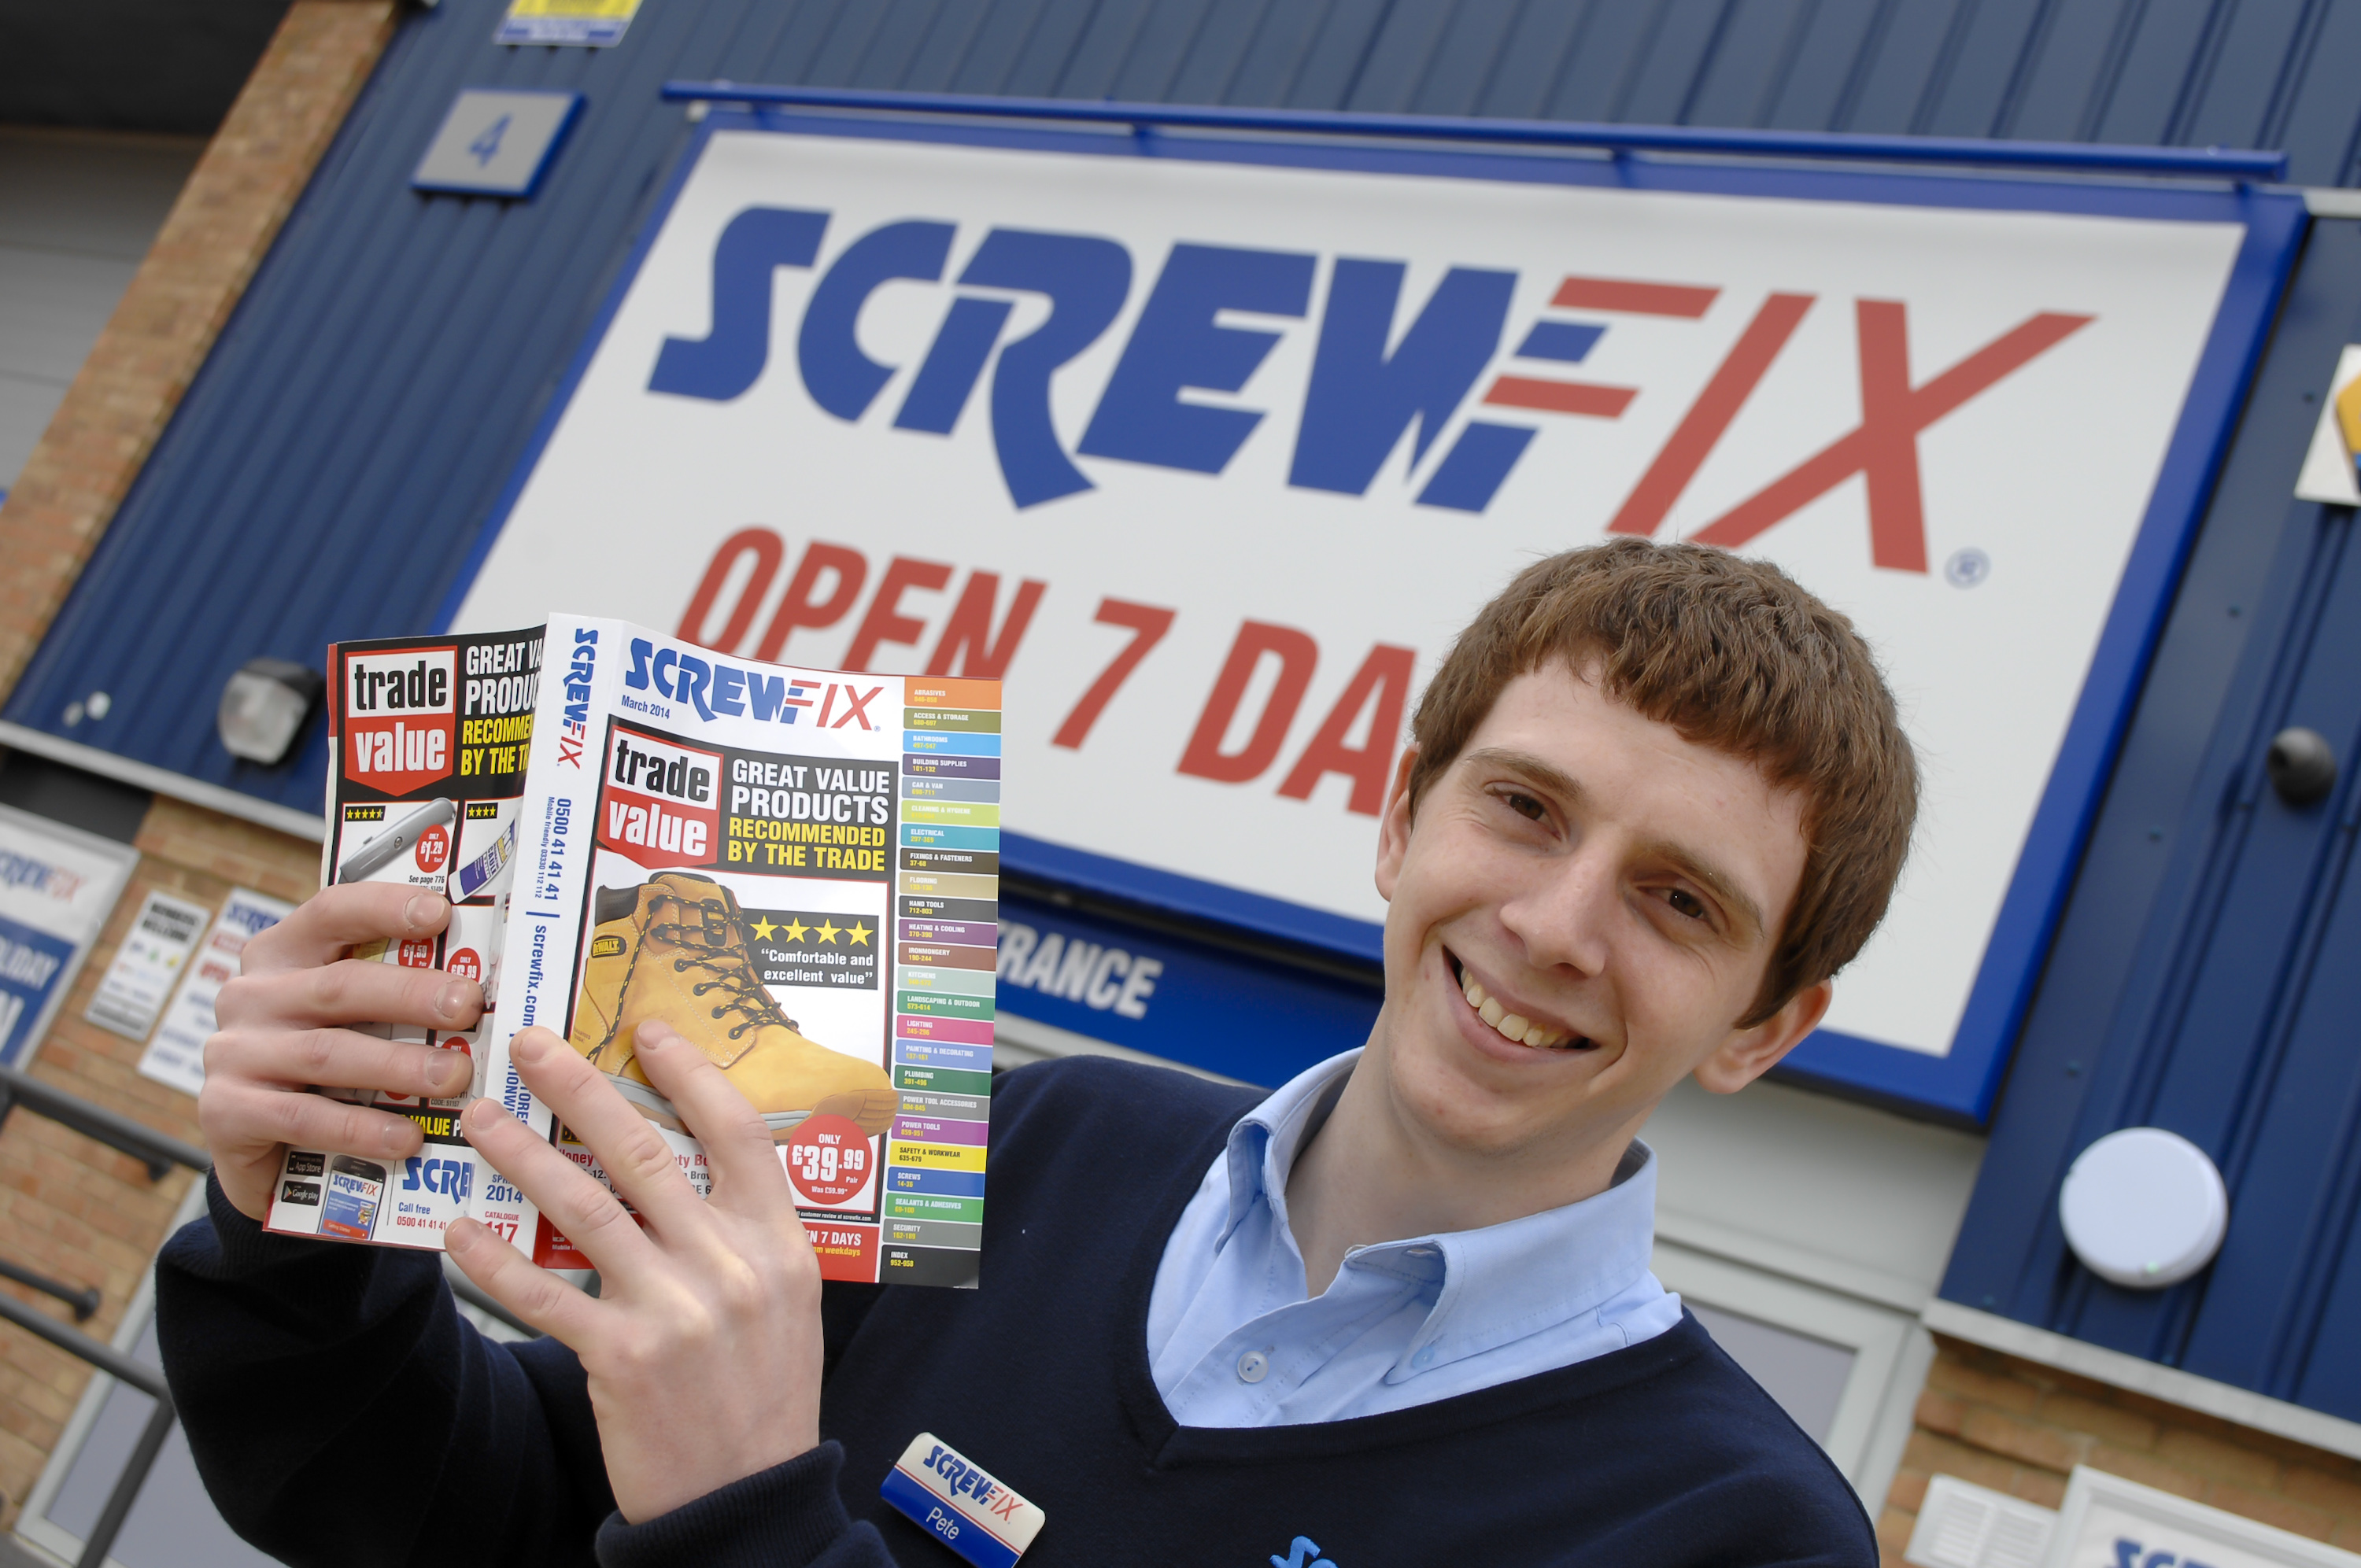 Abingdon’s first Screwfix store is declared a runaway success